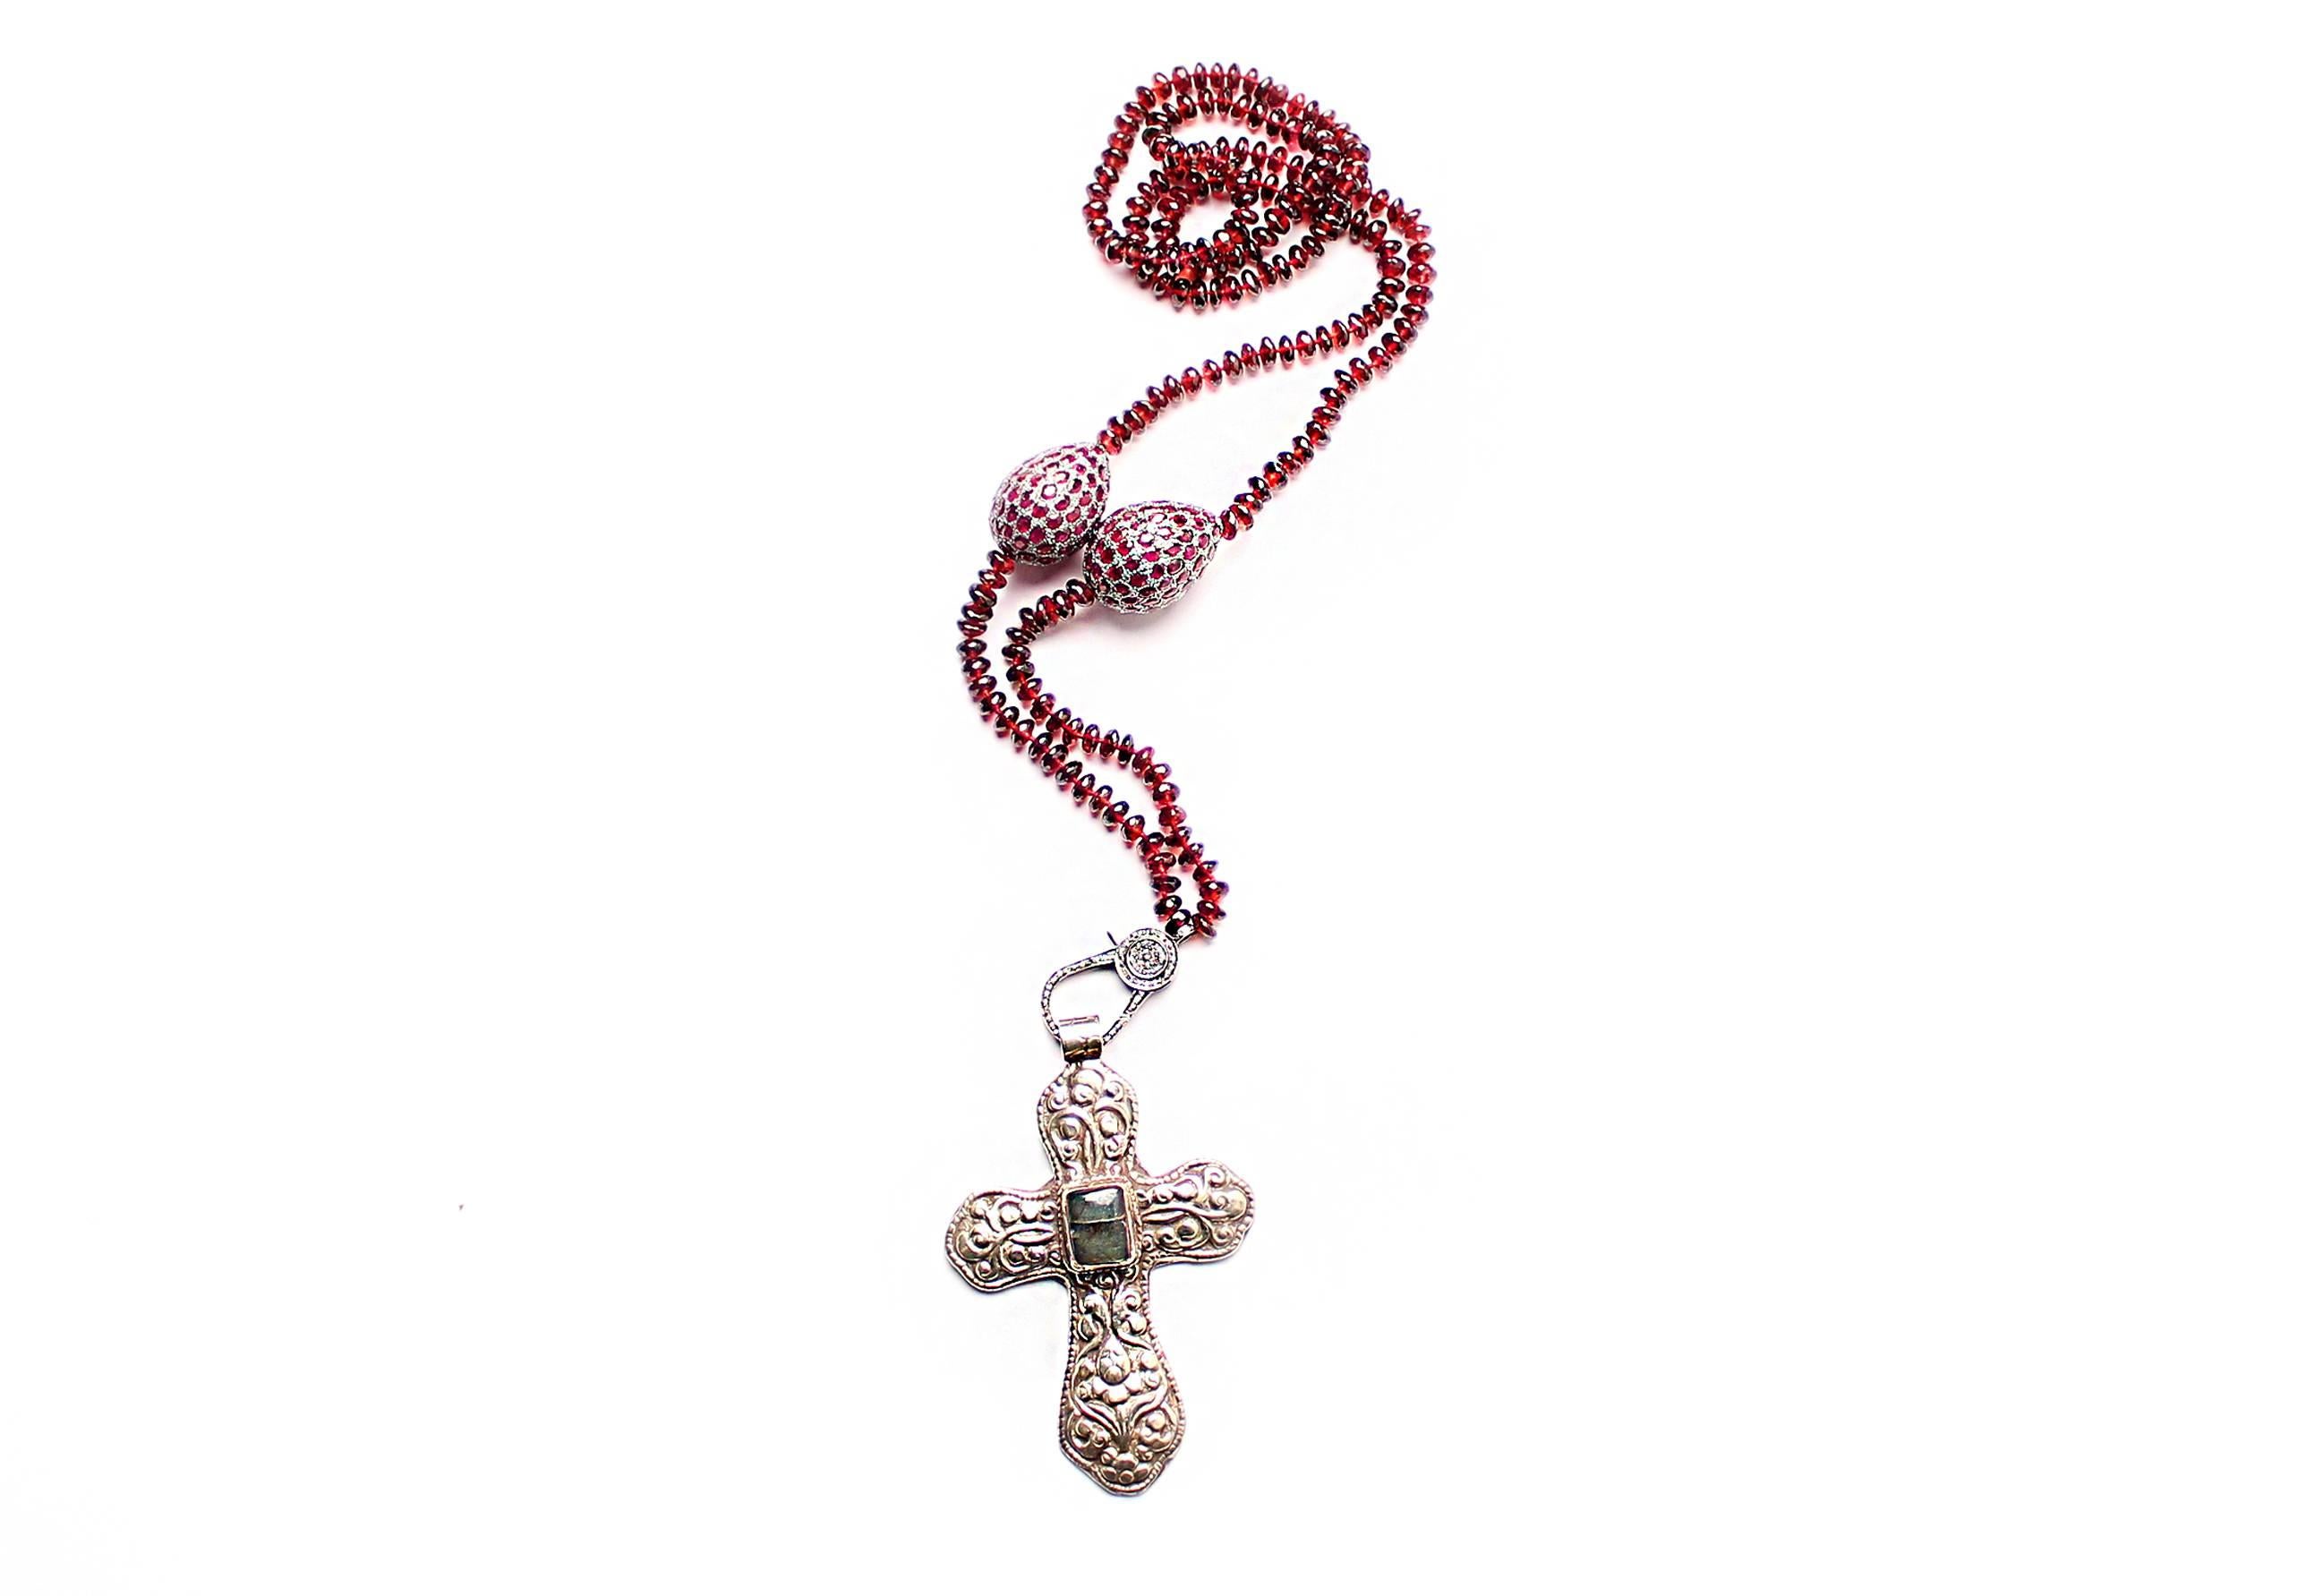 Silver and green onyx cross pendant with loop on top. Garnet beads with garnet stone and silver tumblers, and diamond/silver clasp.